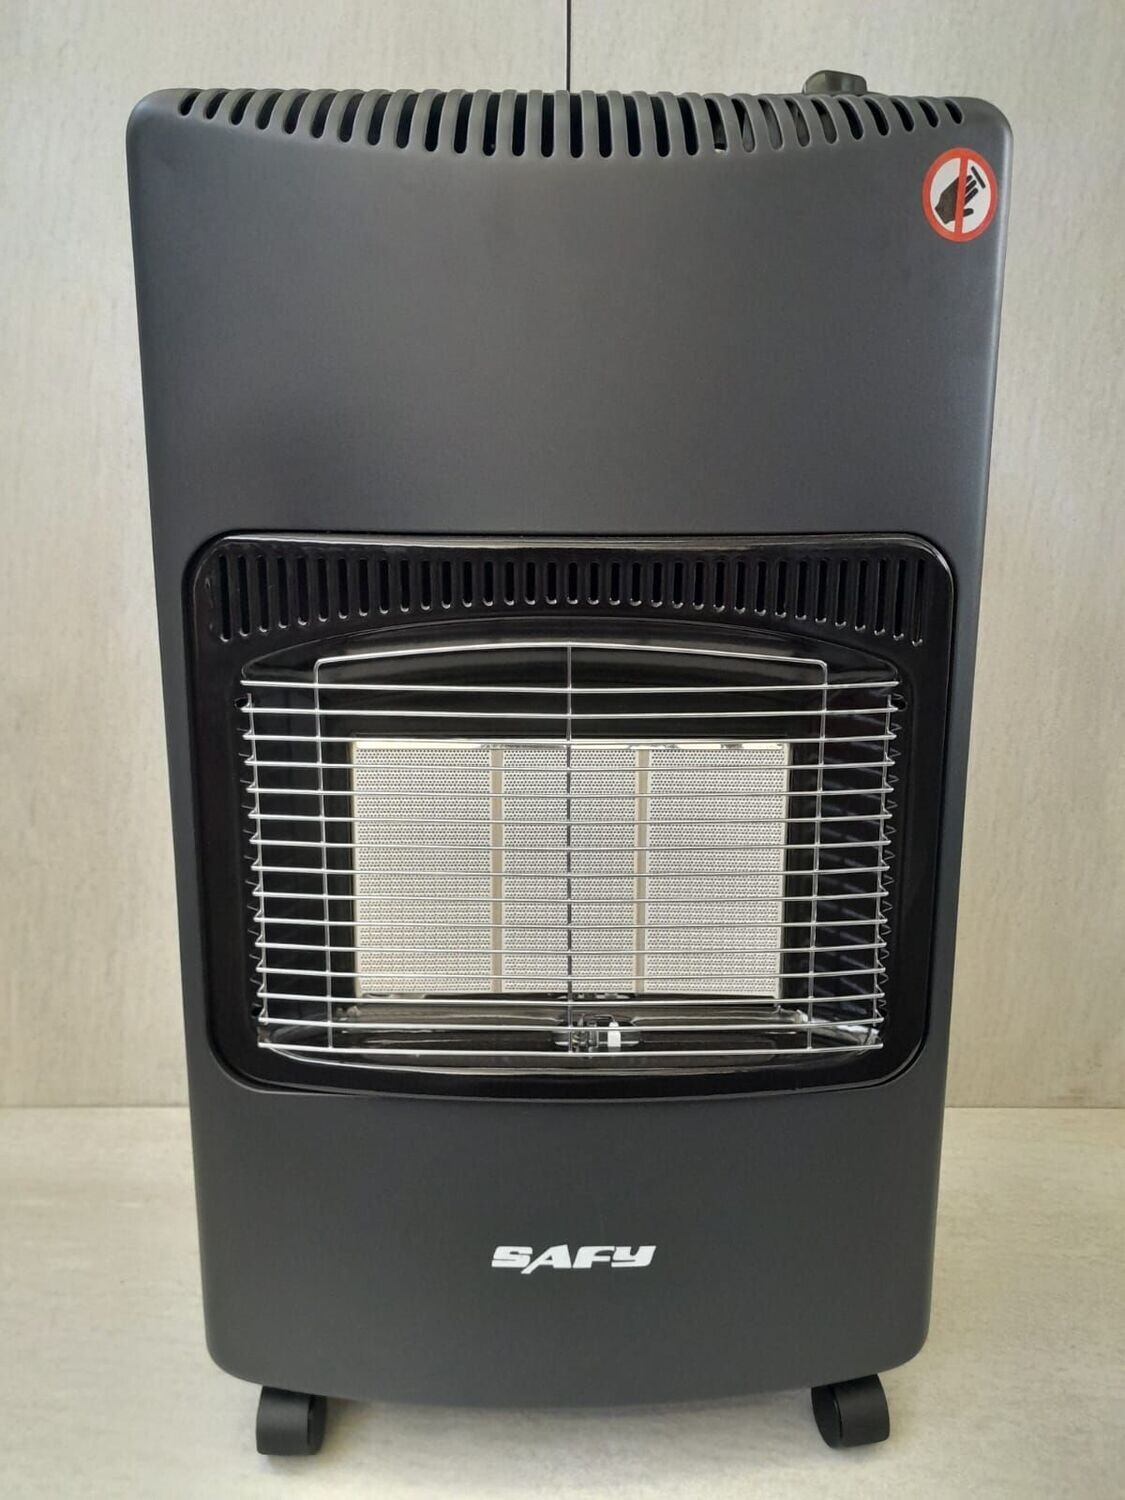 GAS Heater fit 9kg Cylinder. Model: Roll About Heater